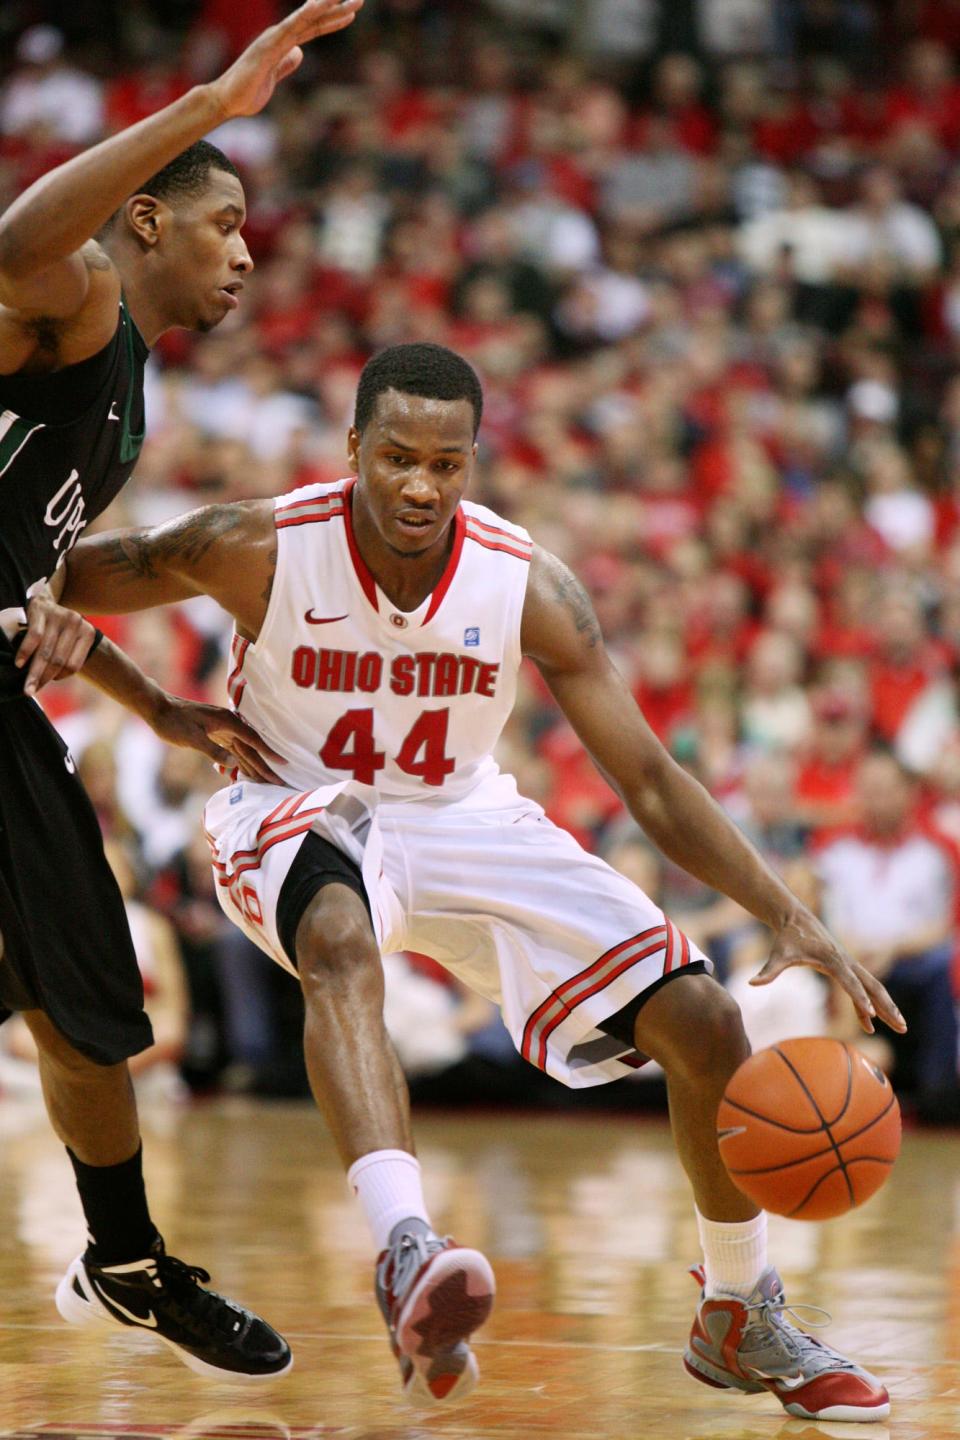 Ohio State Buckeyes guard William Buford (44) in action during a men's basketball game between the Ohio State Buckeyes and  South Carolina Upstate Spartans at Value City Arena on December 14, 2011. (Columbus Dispatch photo by Fred Squillante)